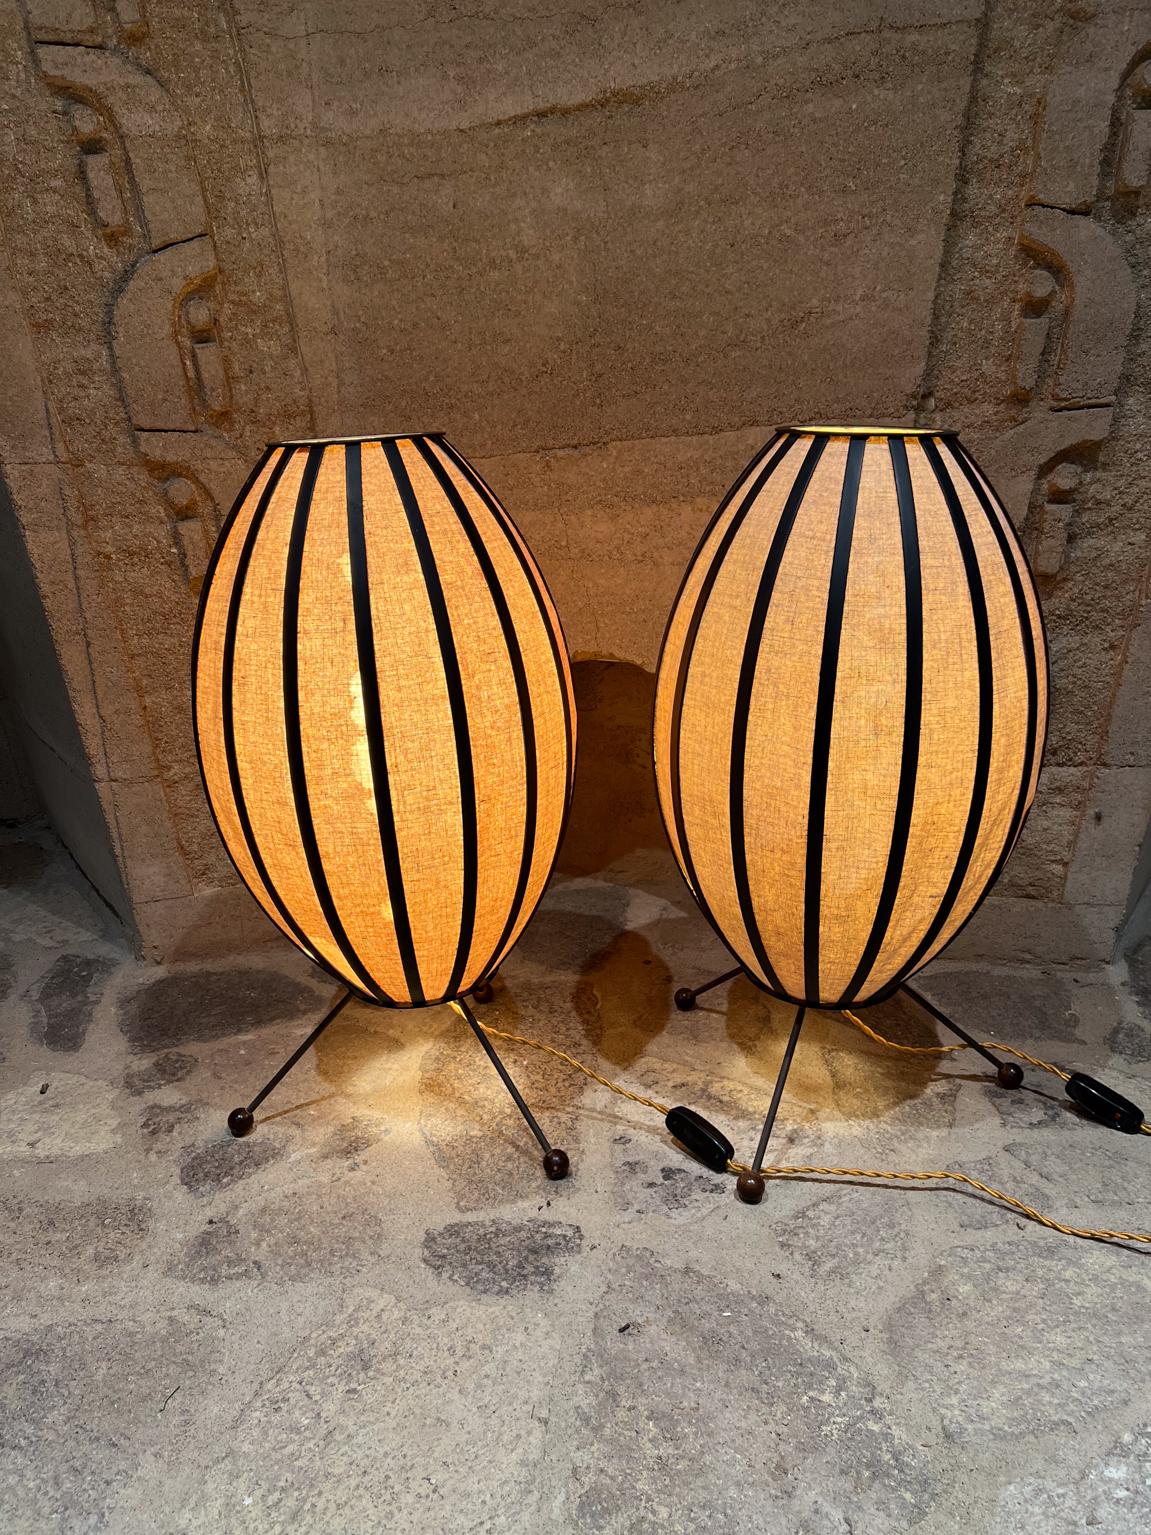 1960s MCM Style of George Nelson Ball Tripod Lamps
25.5 h x 12.25 diameter
Custom piece
Preowned unrestored vintage condition
Refer to images
Local delivery is available. LA OC Palm Springs